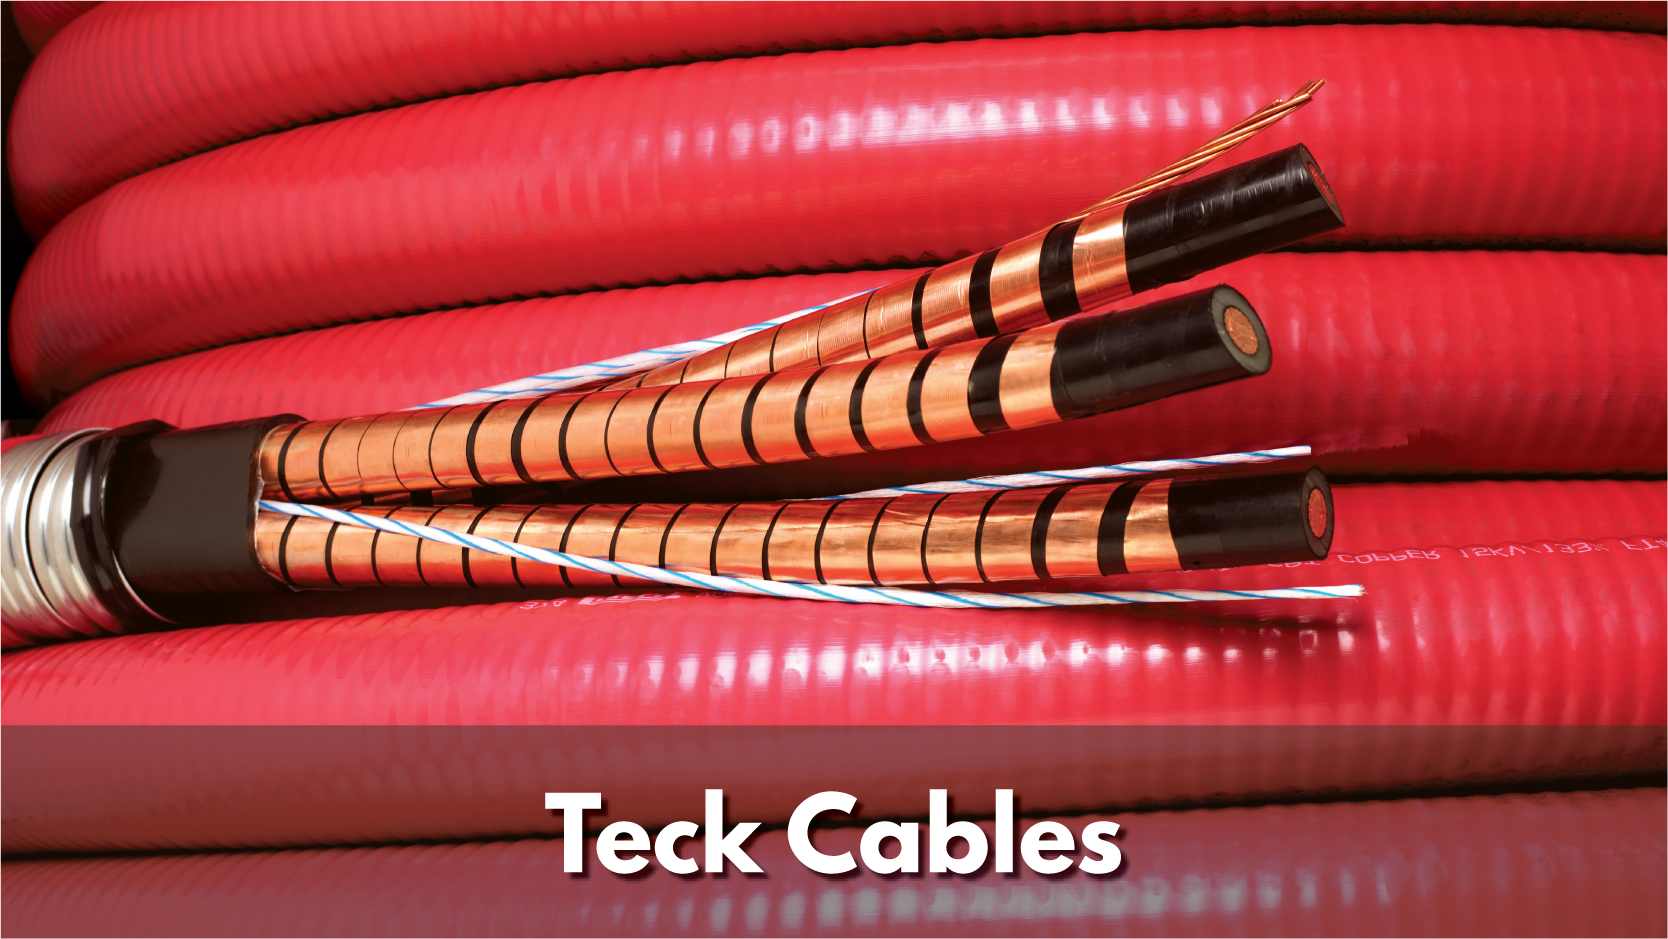 Texcan - View All Products - Teck Cables